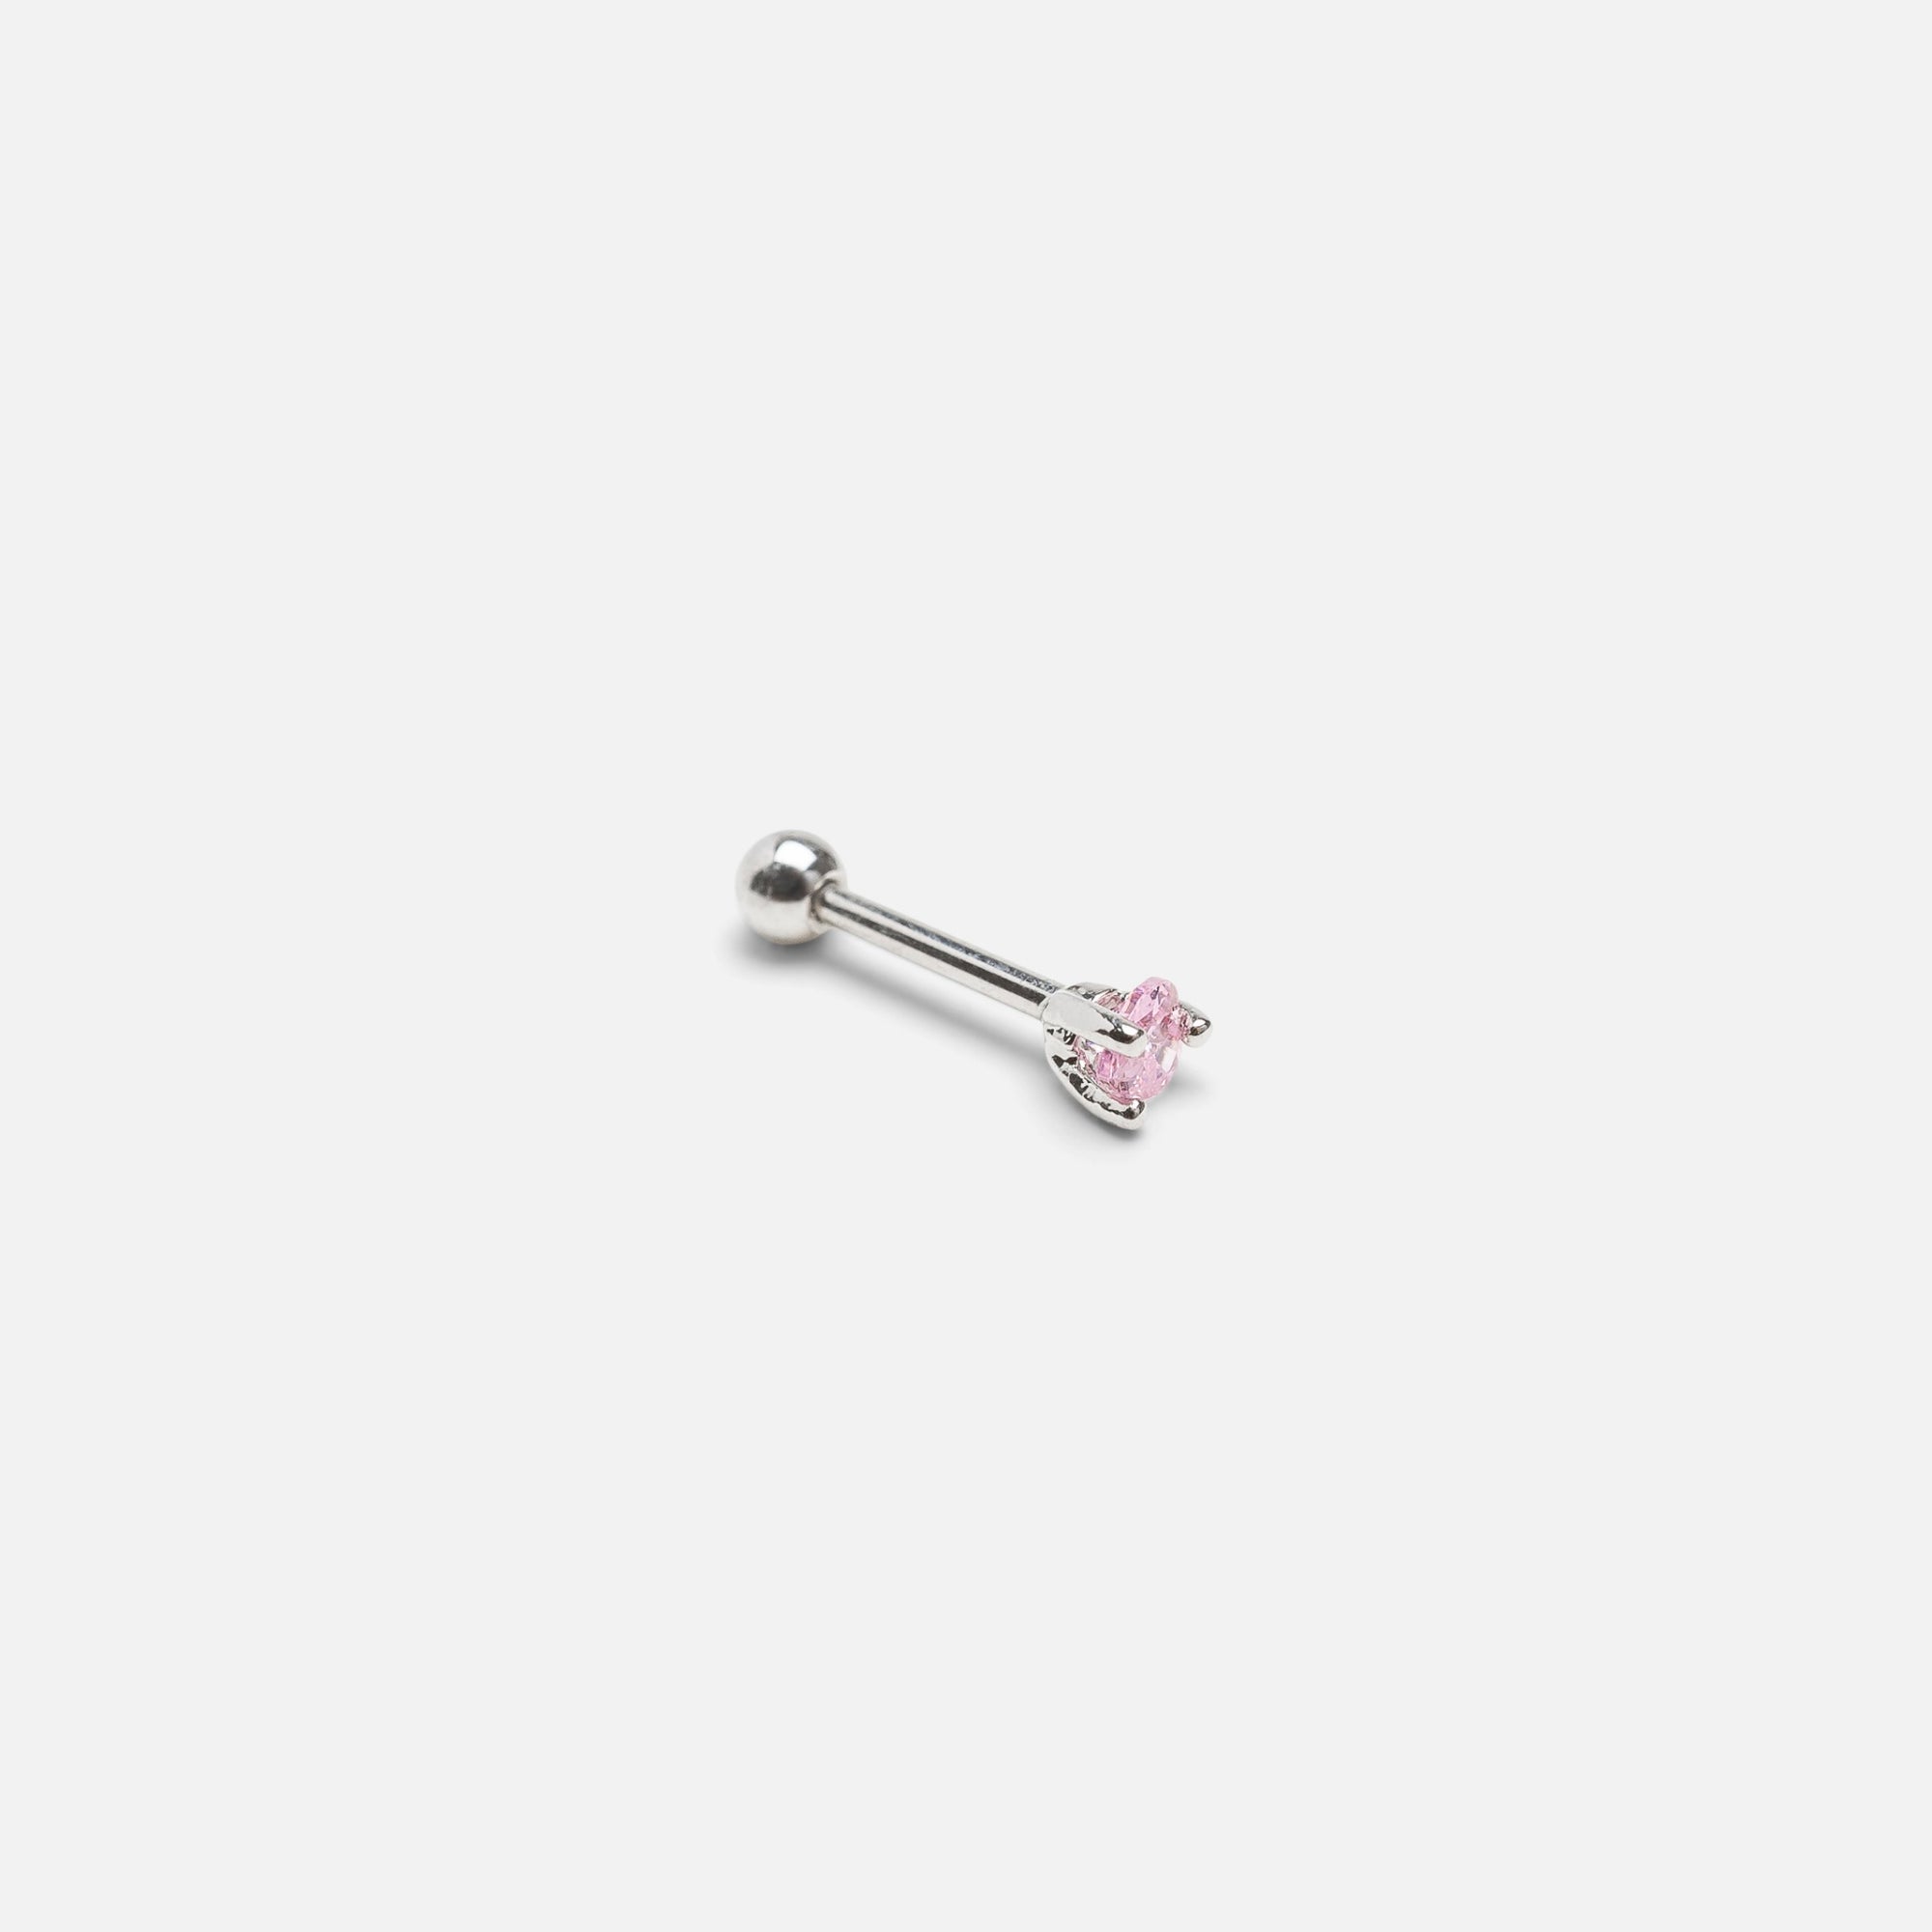 Cartilage piercing earrings with pink, black and silver stones in stainless steel